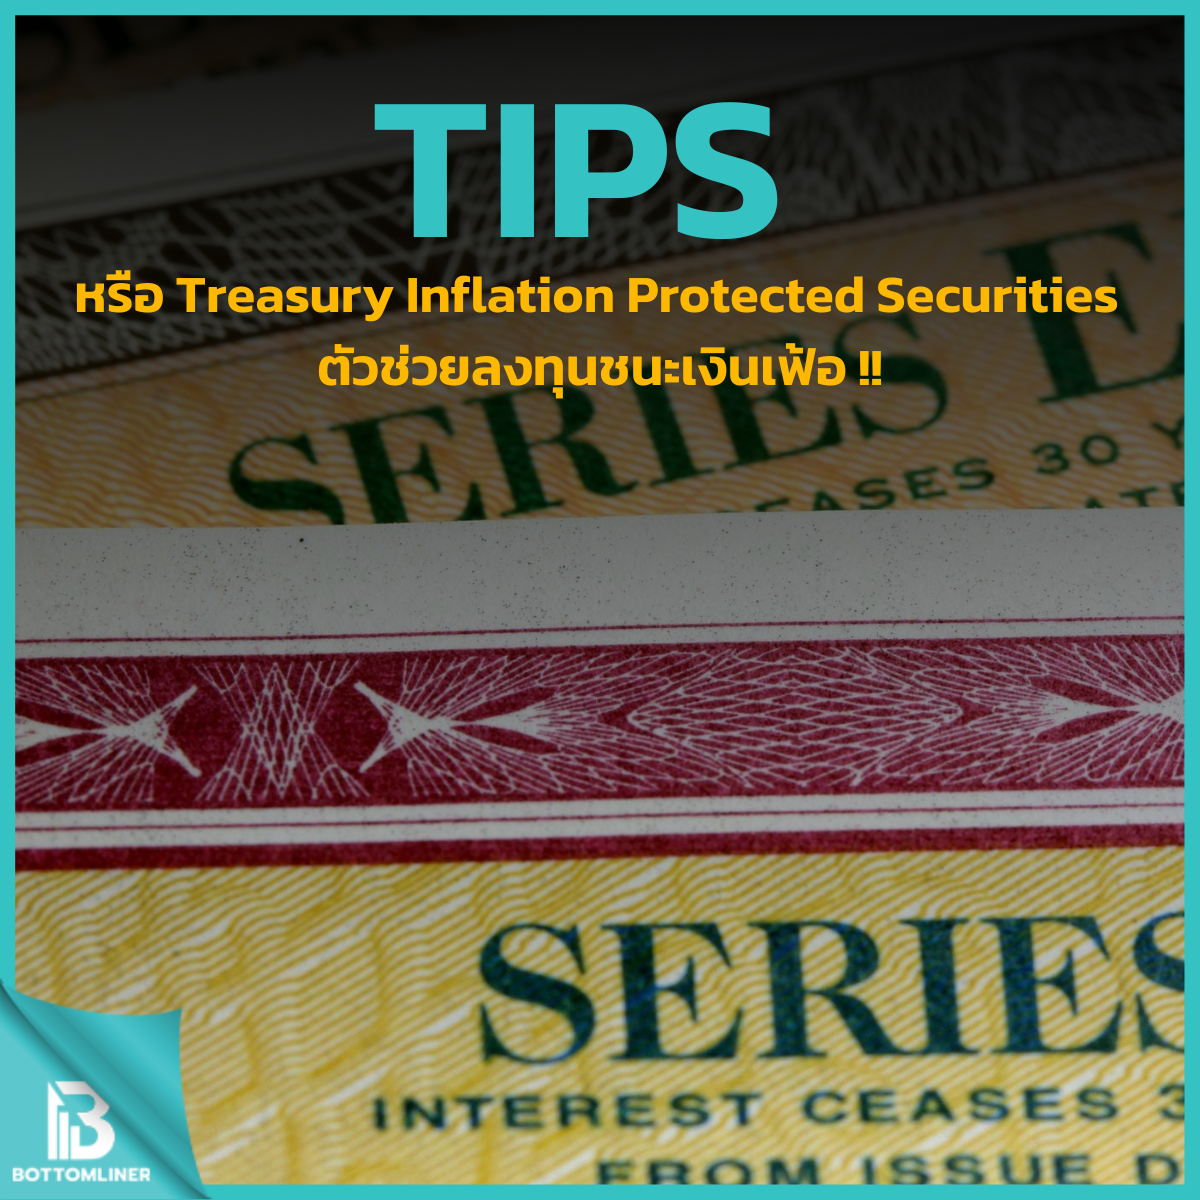 TIPS หรือ Treasury Inflation Protected Securities (TIPS) ตัวช่วยลงทุนชนะเงินเฟ้อ !!